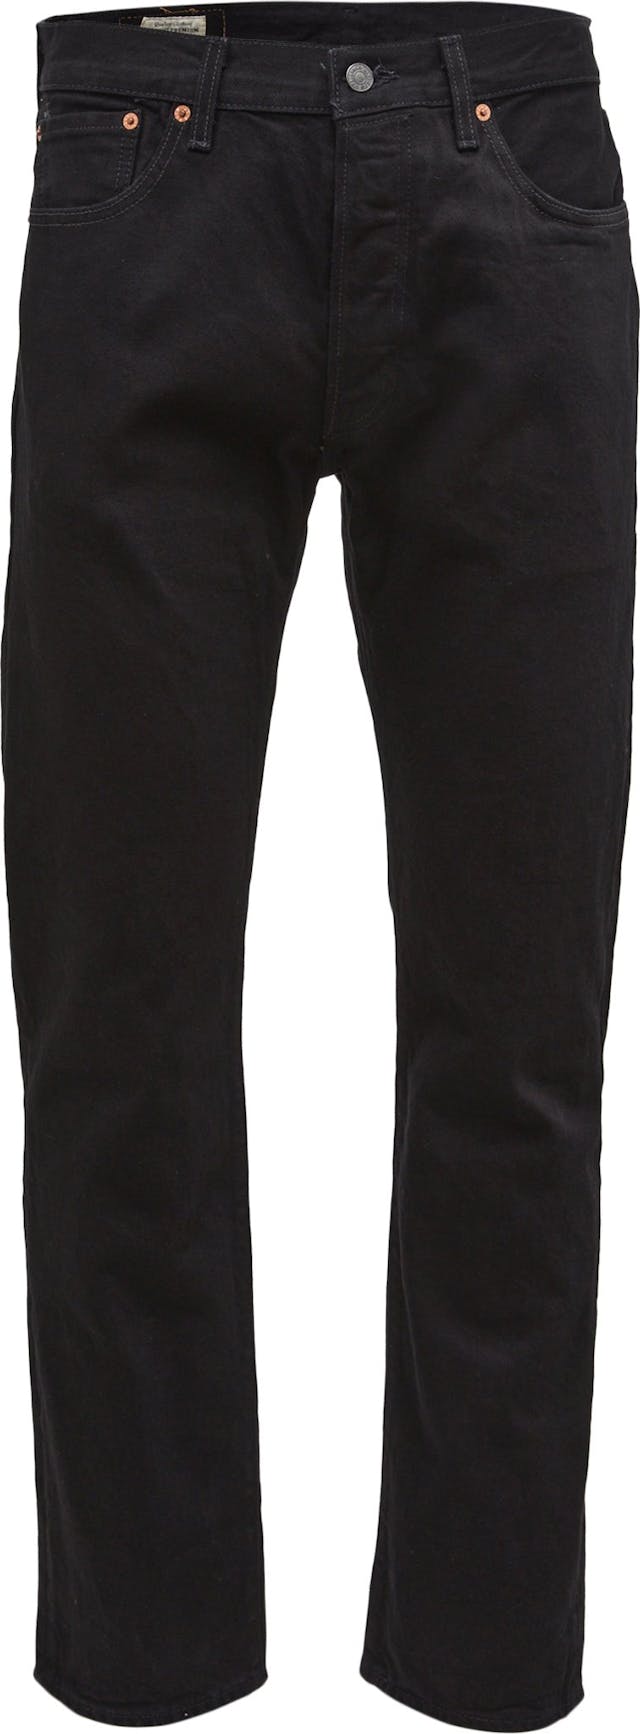 Product image for 501 '93 Straight Jeans - Men's